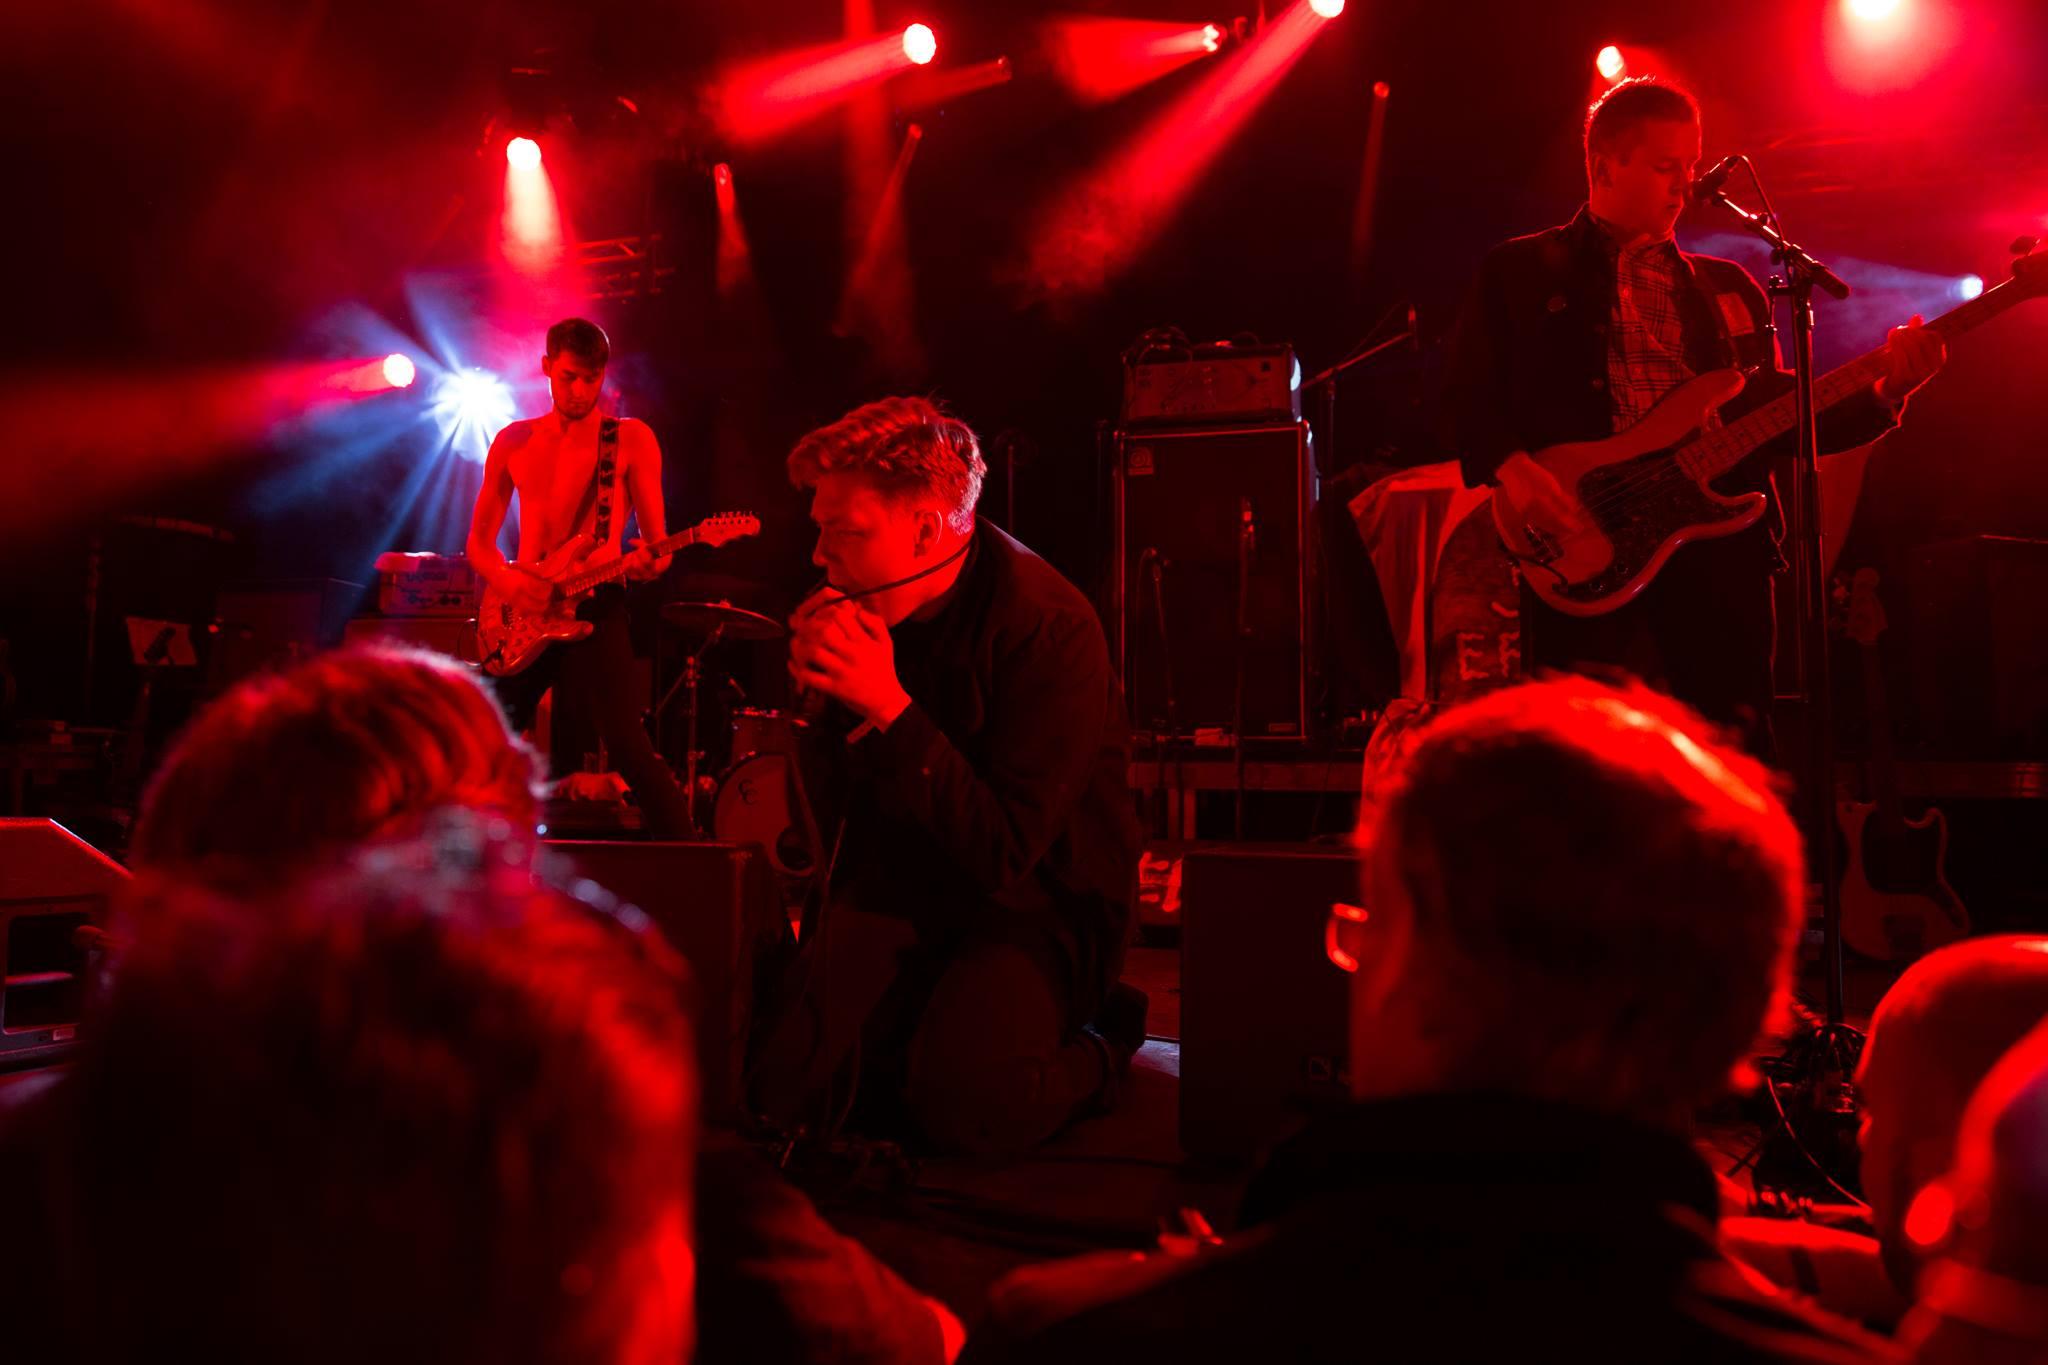  LIVE REPORT LES INROCKS PHILIPS │ THE JESUS AND MARY CHAIN, ROYAL BLOOD, EAGULLS, BAD BREEDING